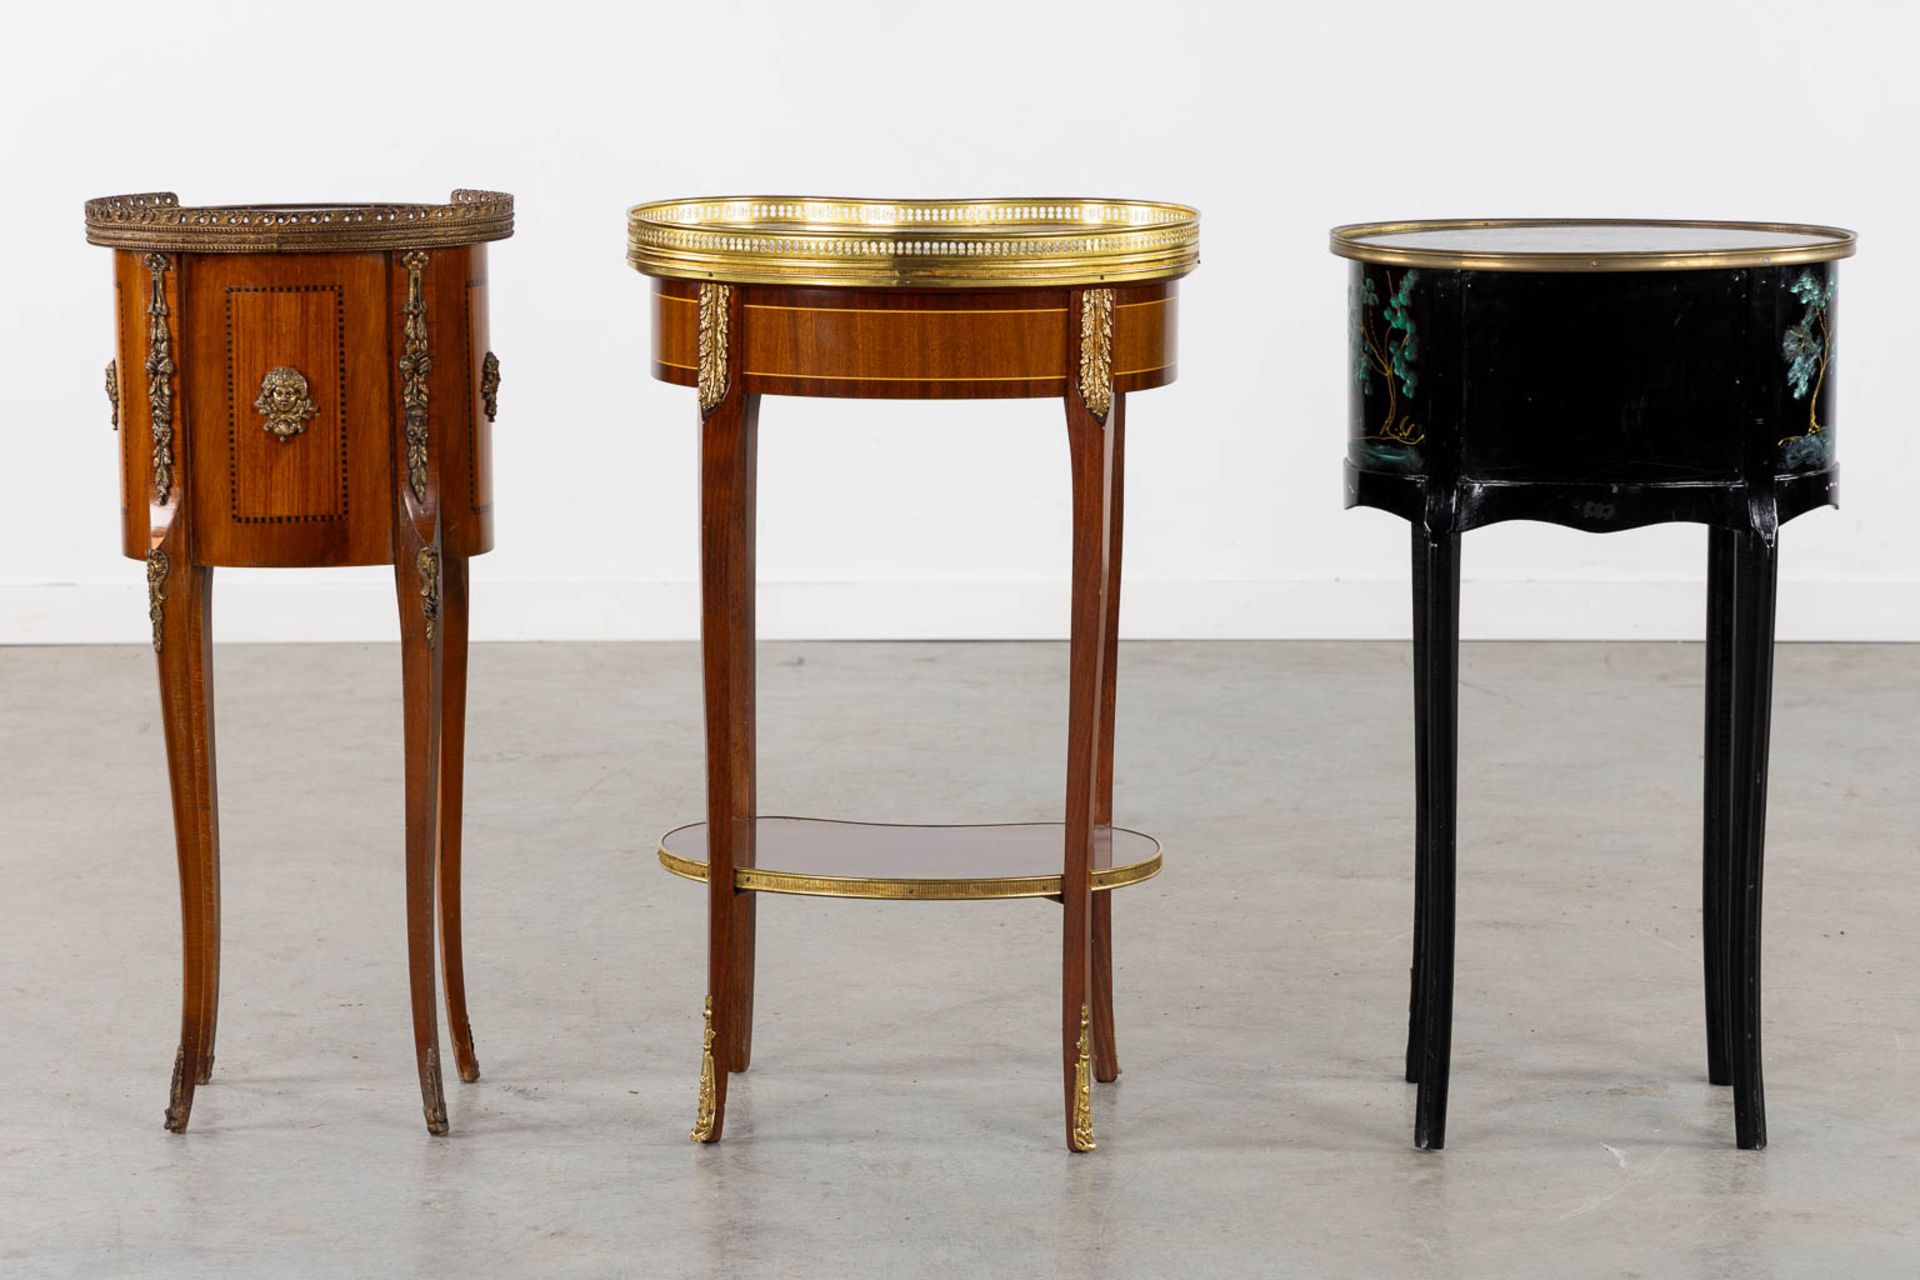 Three small side tables, marquetry and painted decor. 20th C. (L:30 x W:44 x H:71 cm) - Image 6 of 14